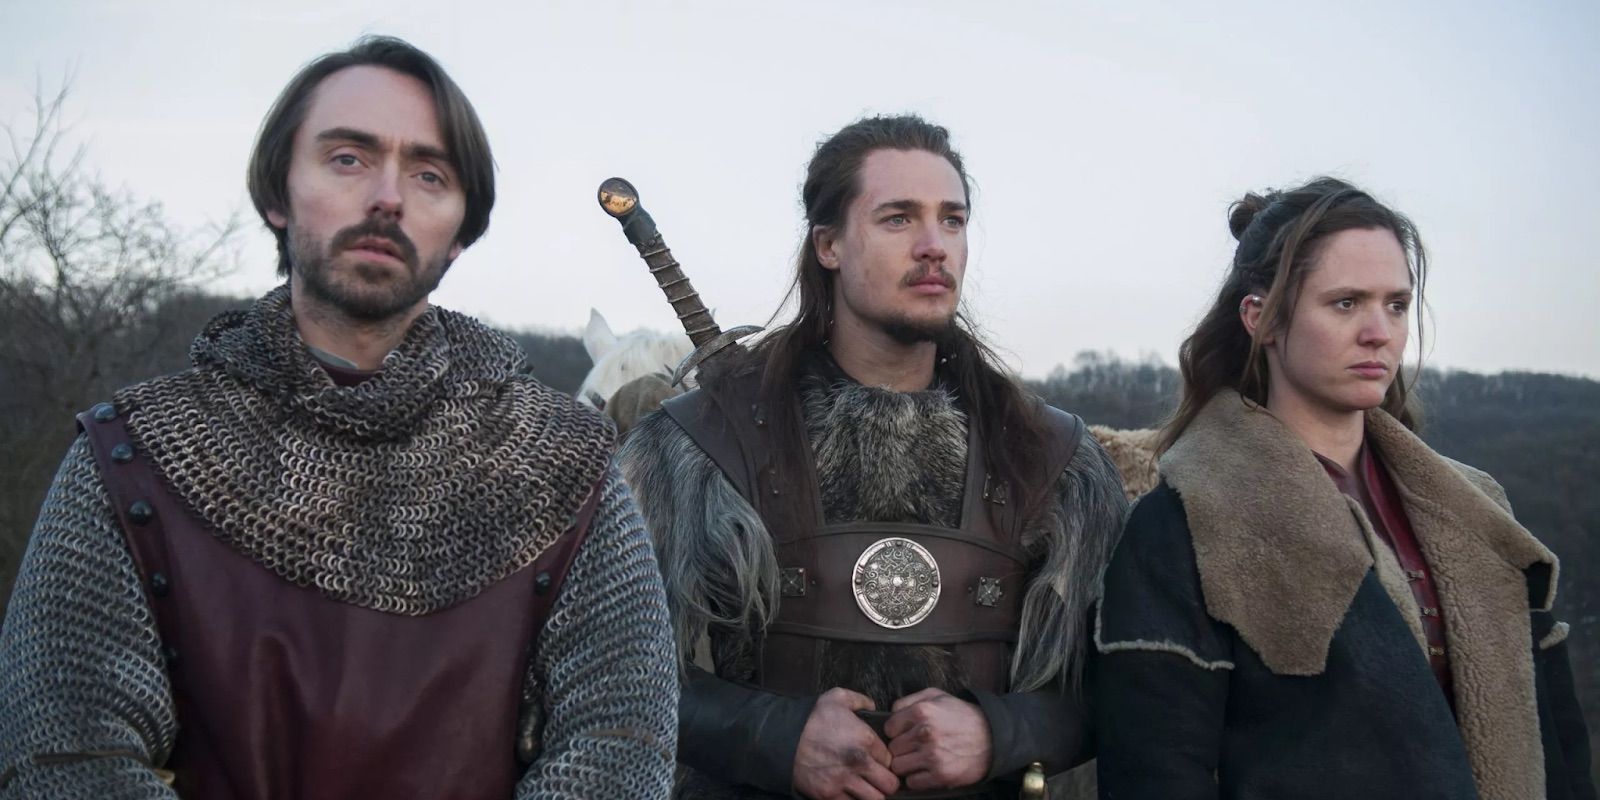 King Alfred next to Uhtred and Brida in The Last Kingdom.